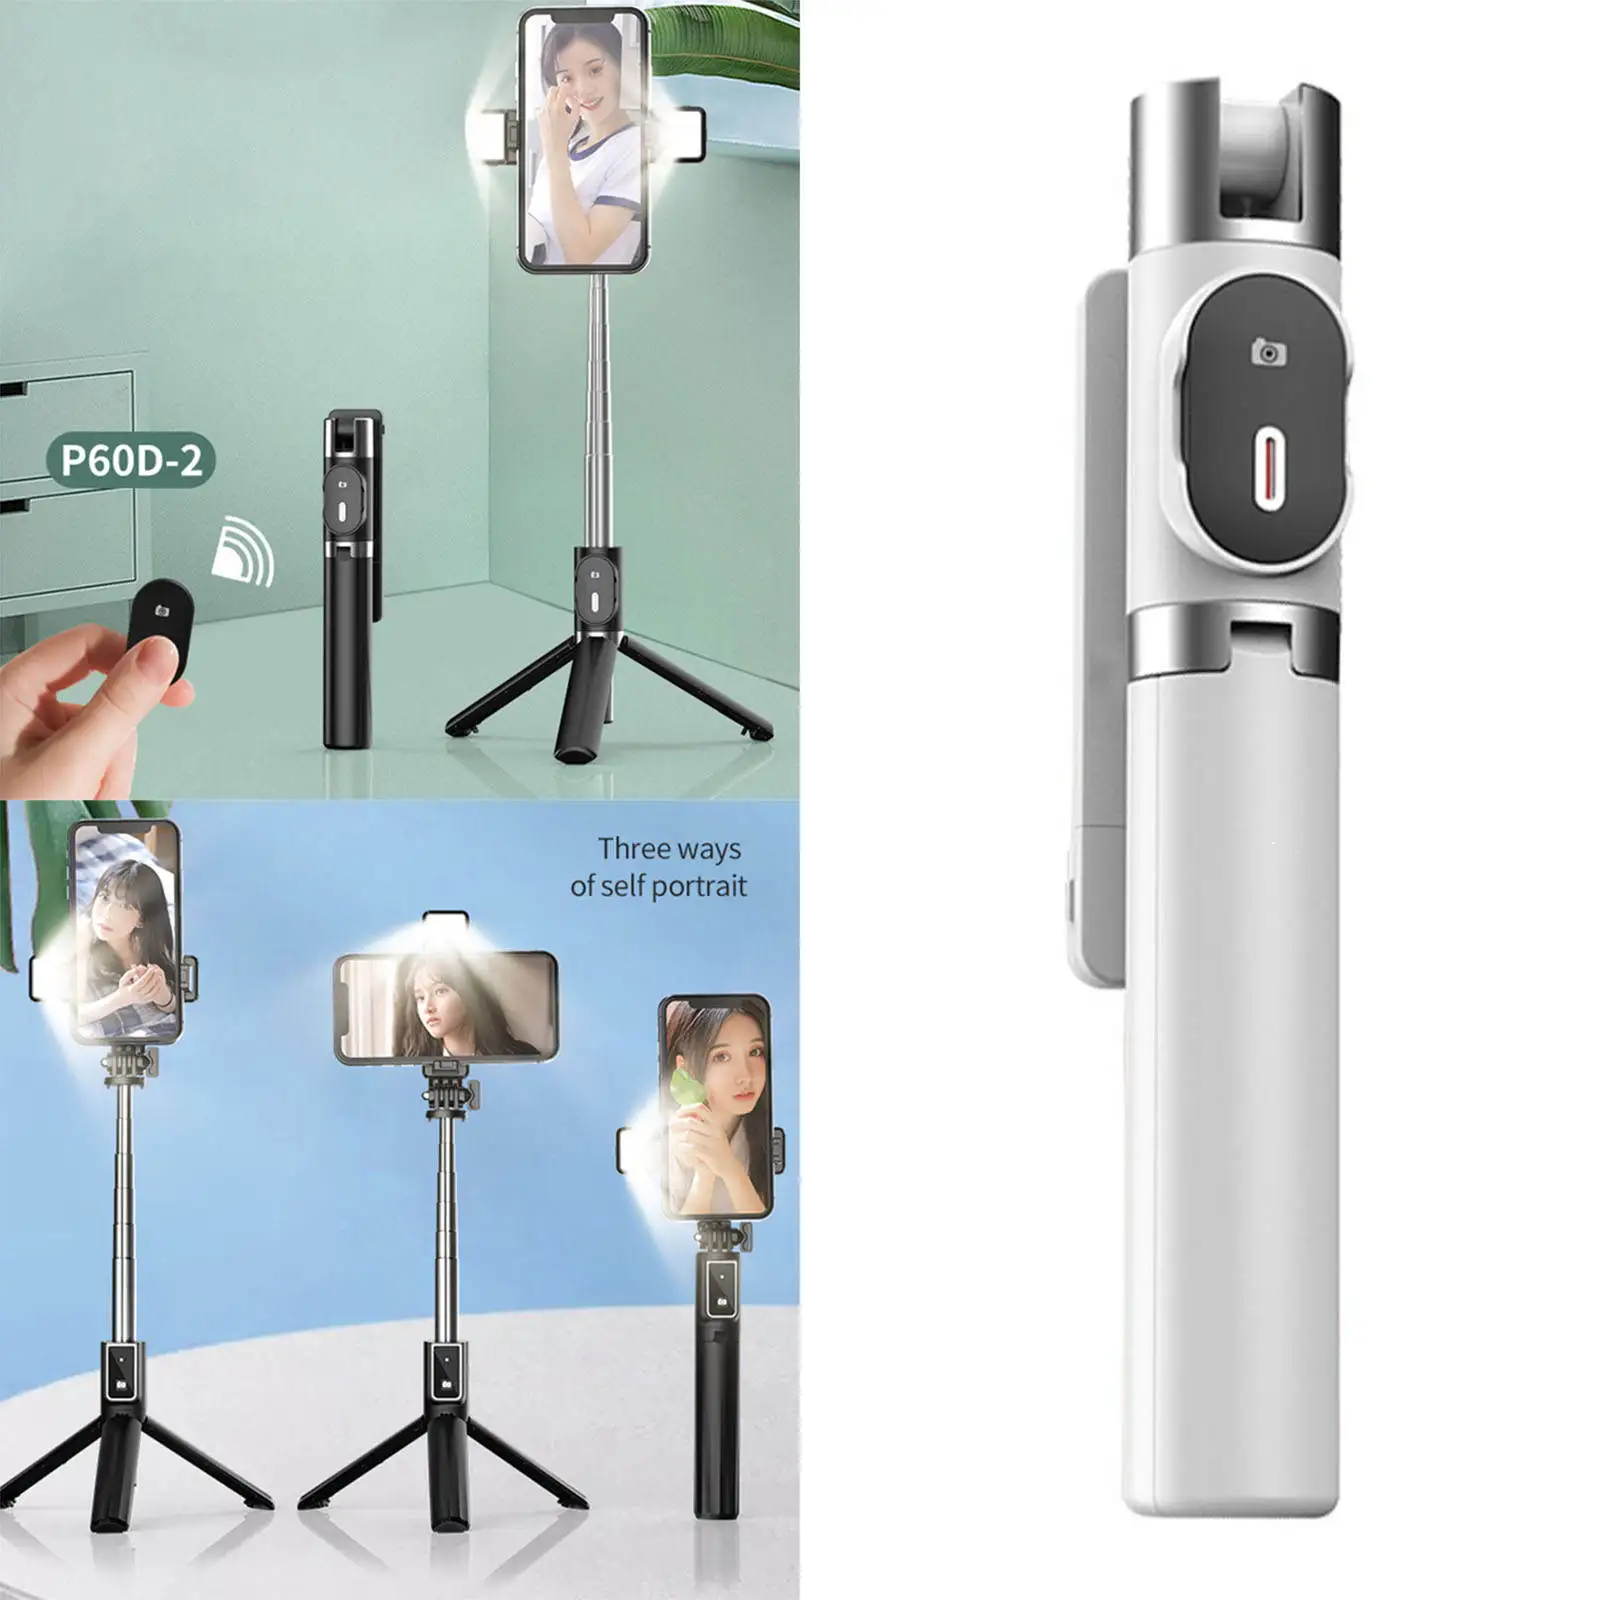 Bluetooth Selfie Stick Tripod Stretchable Professional Adjustable Wireless Remote for iOS Android Smartphones Photograph Travel